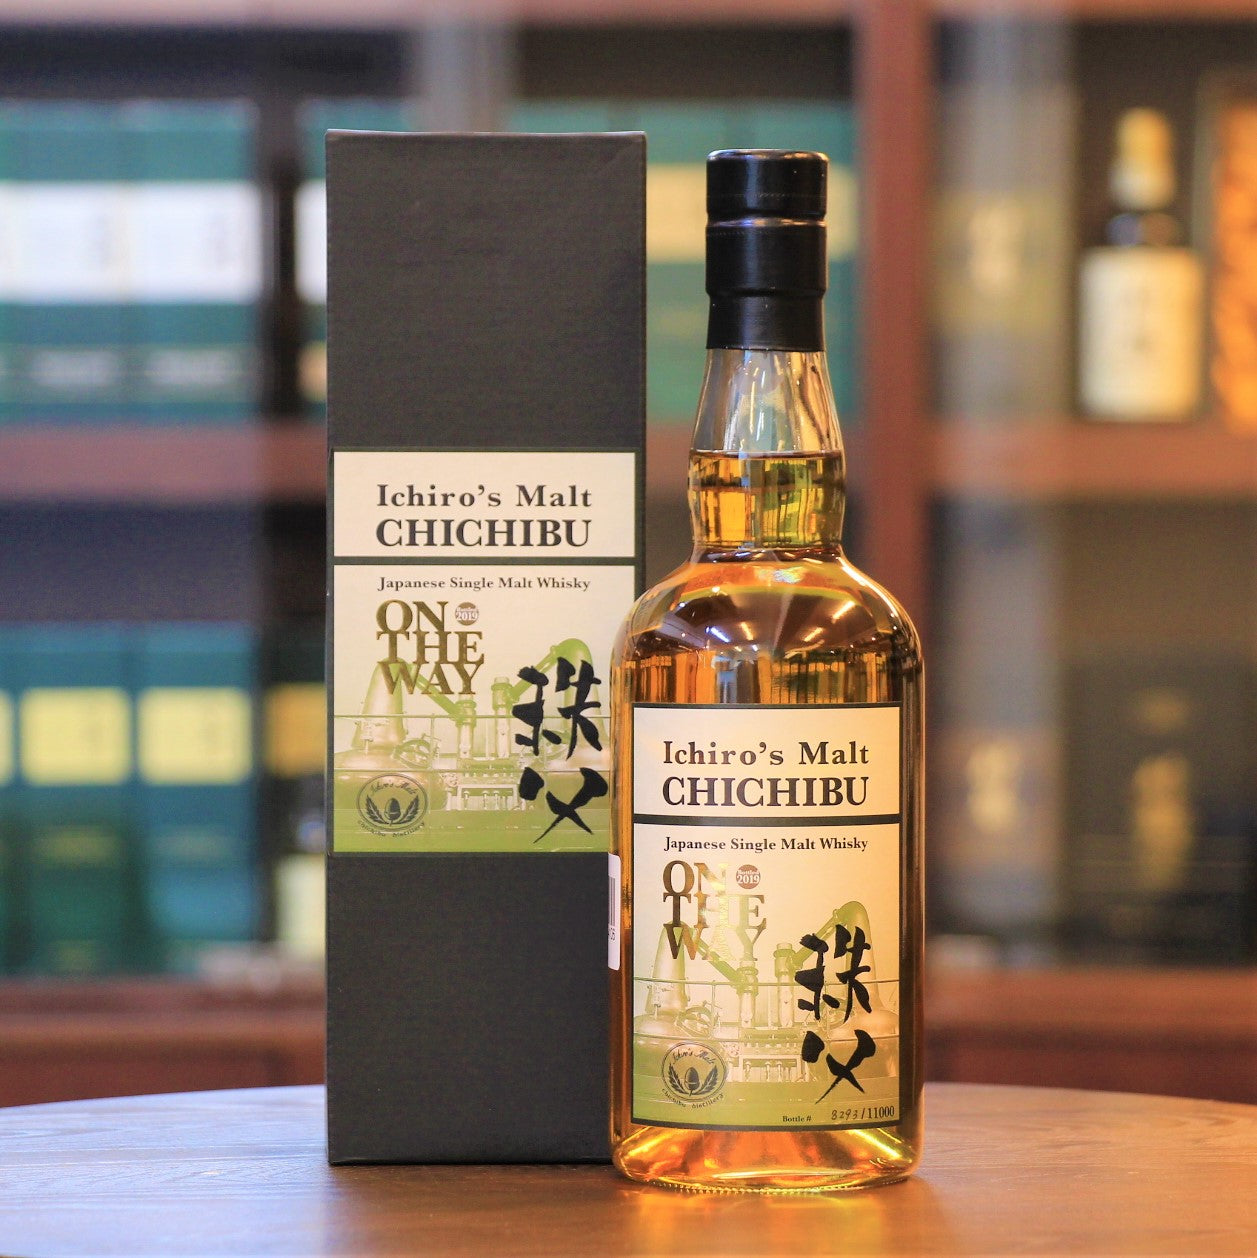 Ichiros Malt On the way to their ten year old whisky. Available on Mizunara The Shop in Hong Kong